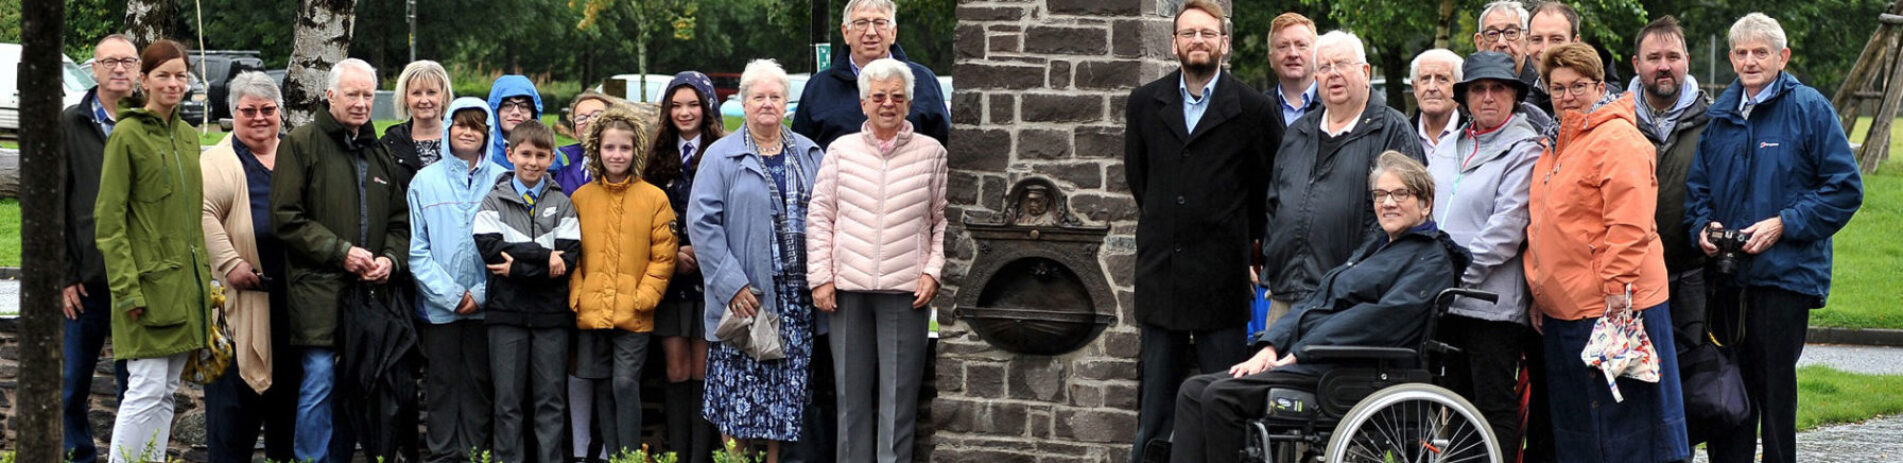 local-community-members-gathered-around-new-fountain-in-balloch-village-square-after-refurbishment